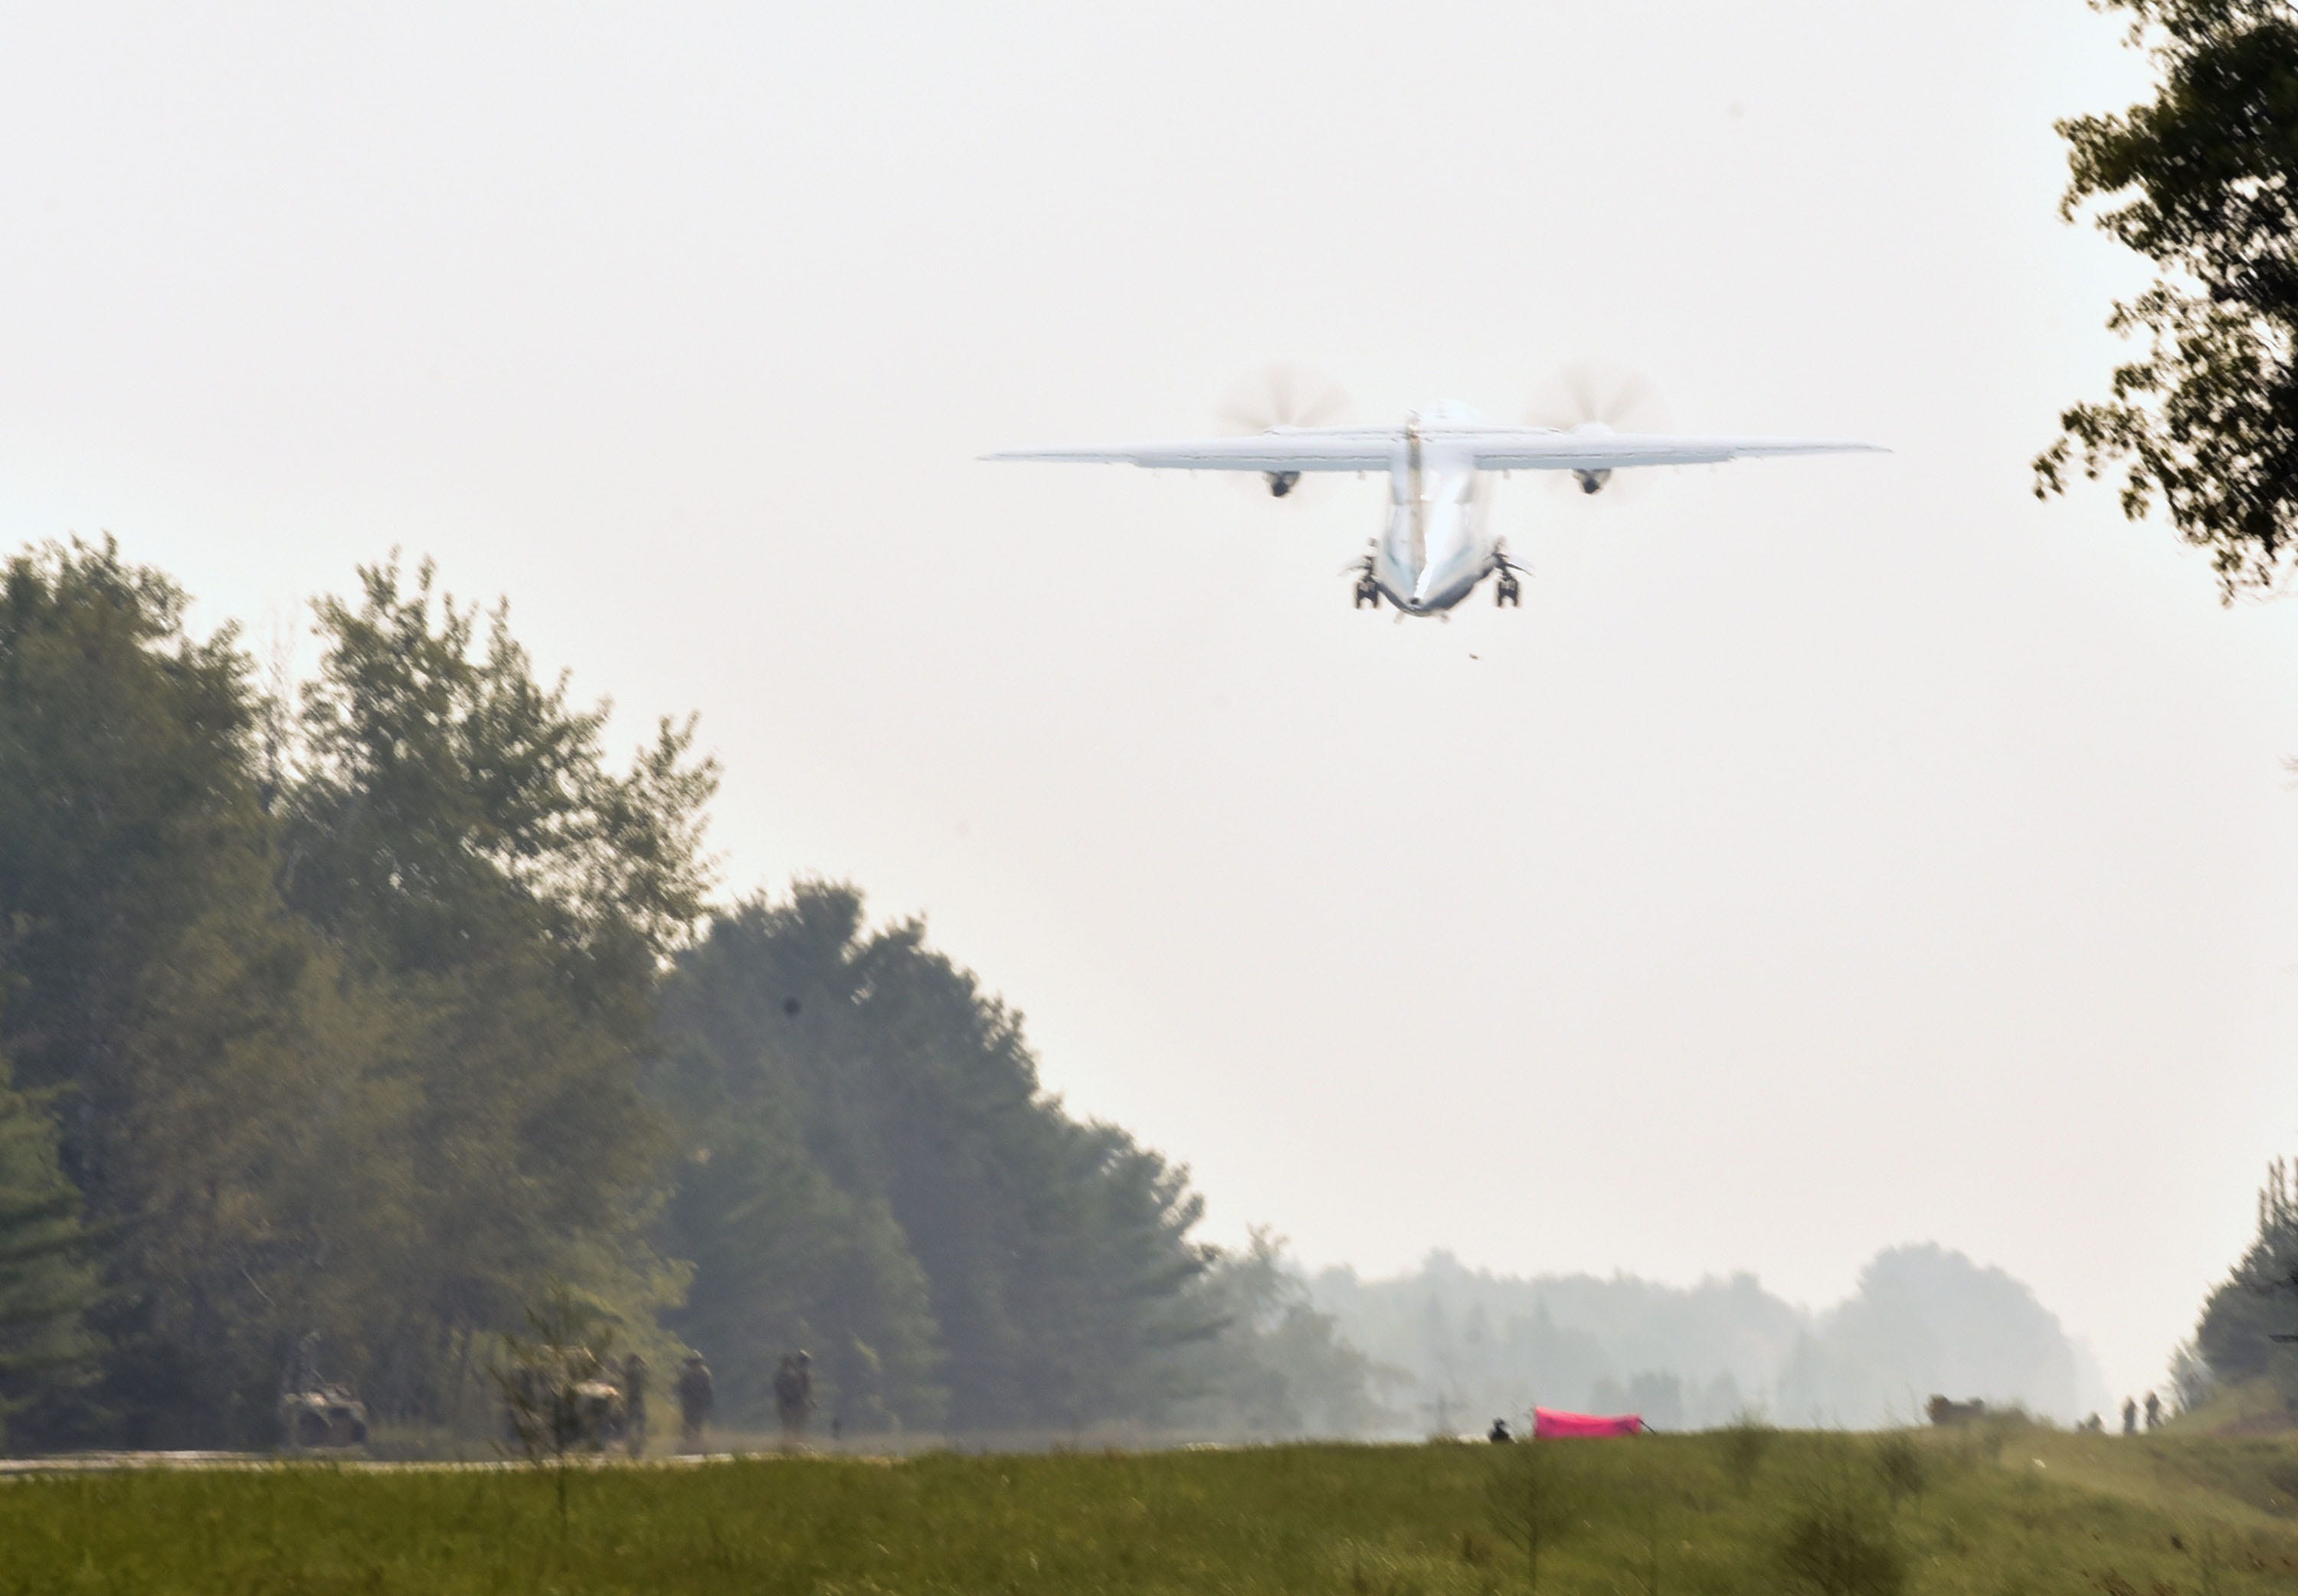 A C-146 aircraft takes off from highway M-32 west of Alpena Thursday, August5, 2021, part of an exercise to practice landing on a highway for Operation Northern Strike.